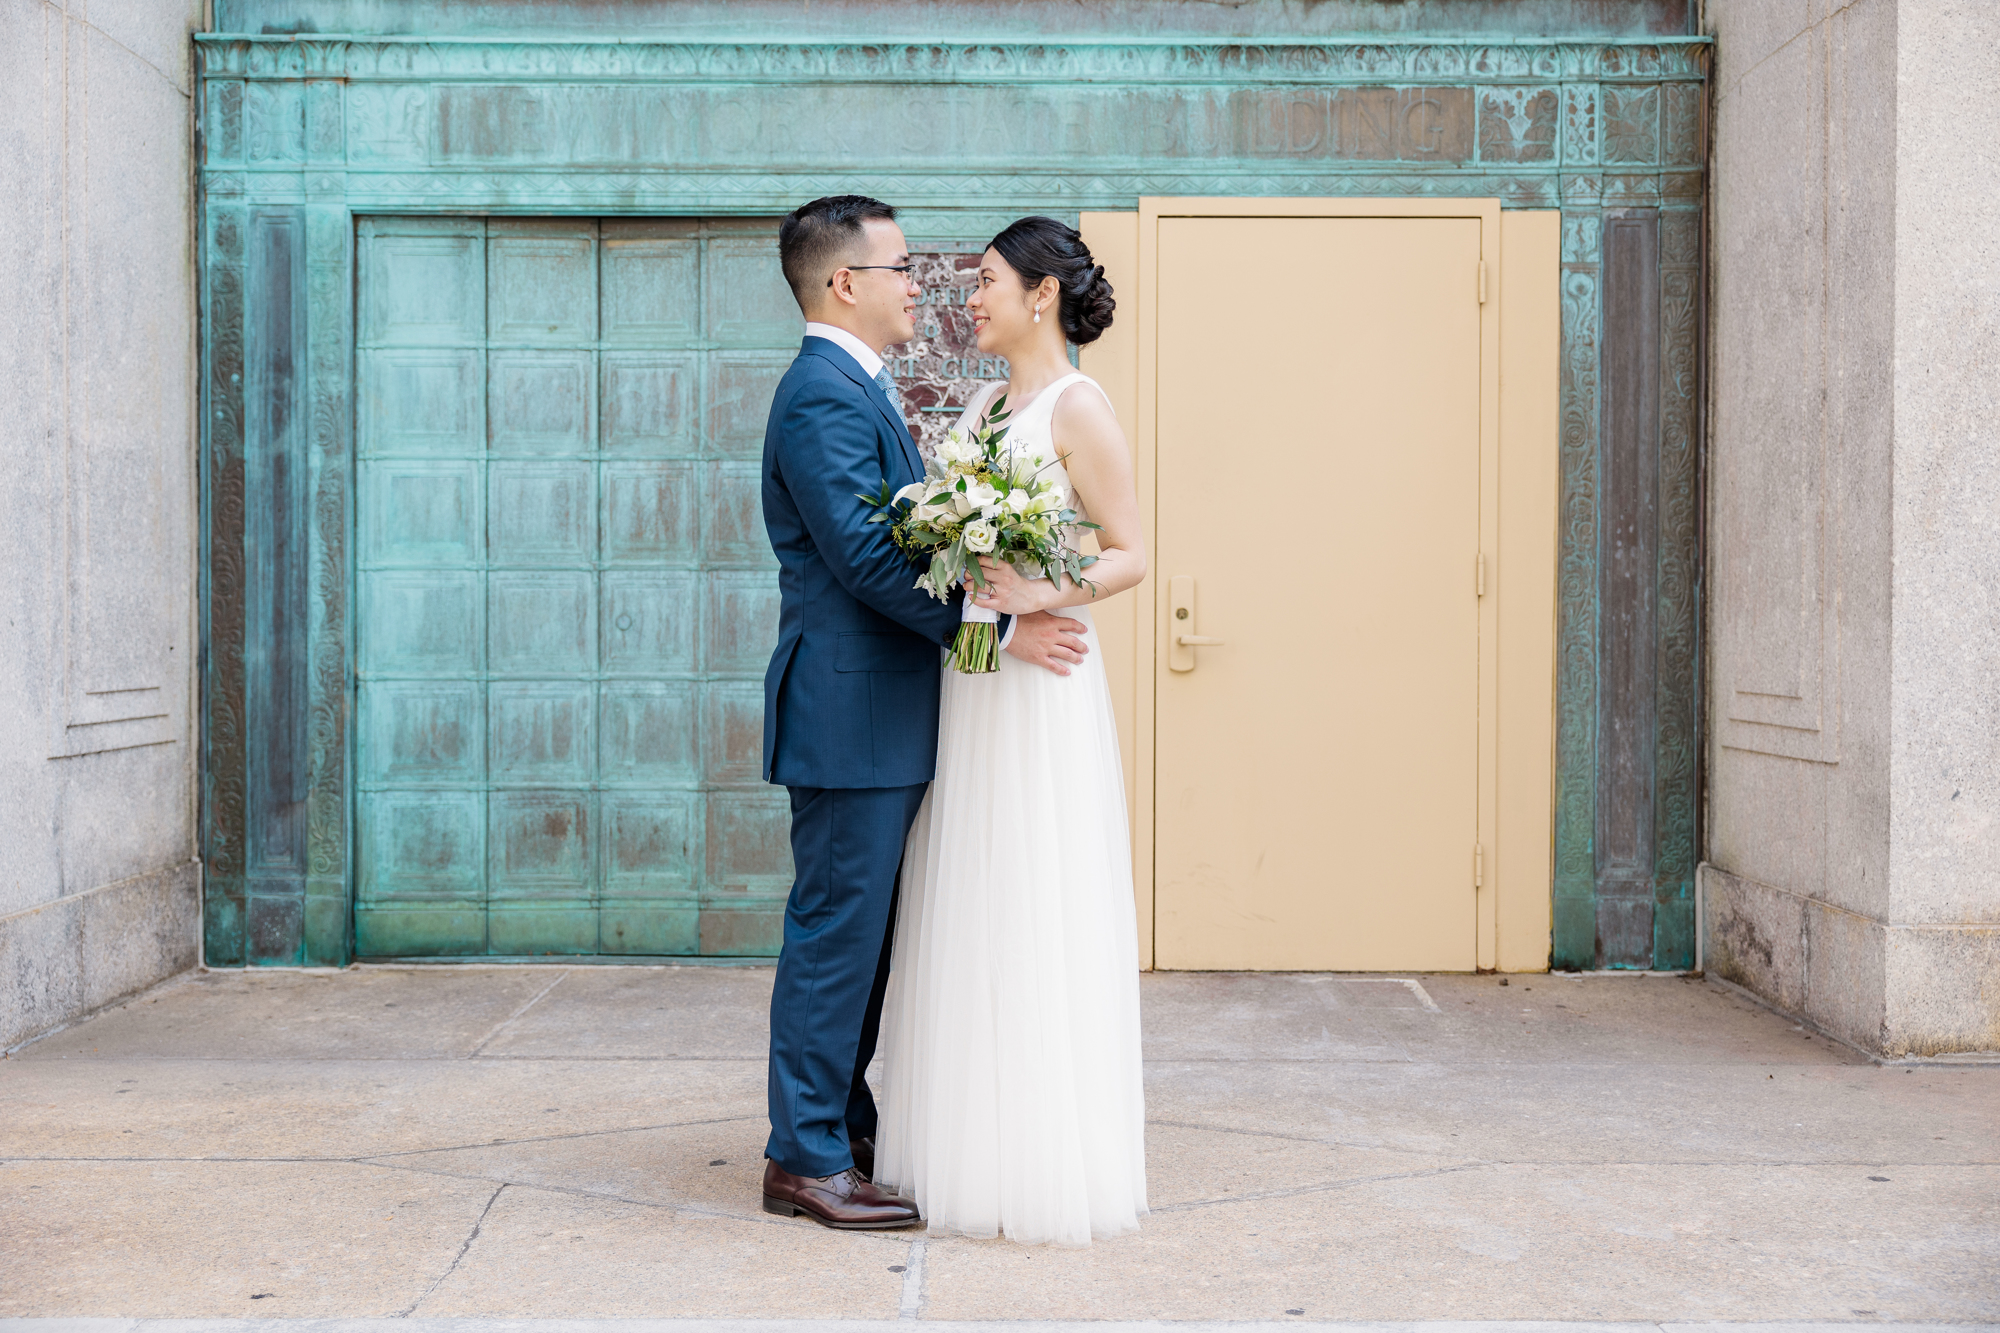 The Cost of New York Photographers for a Gorgeous Elopement